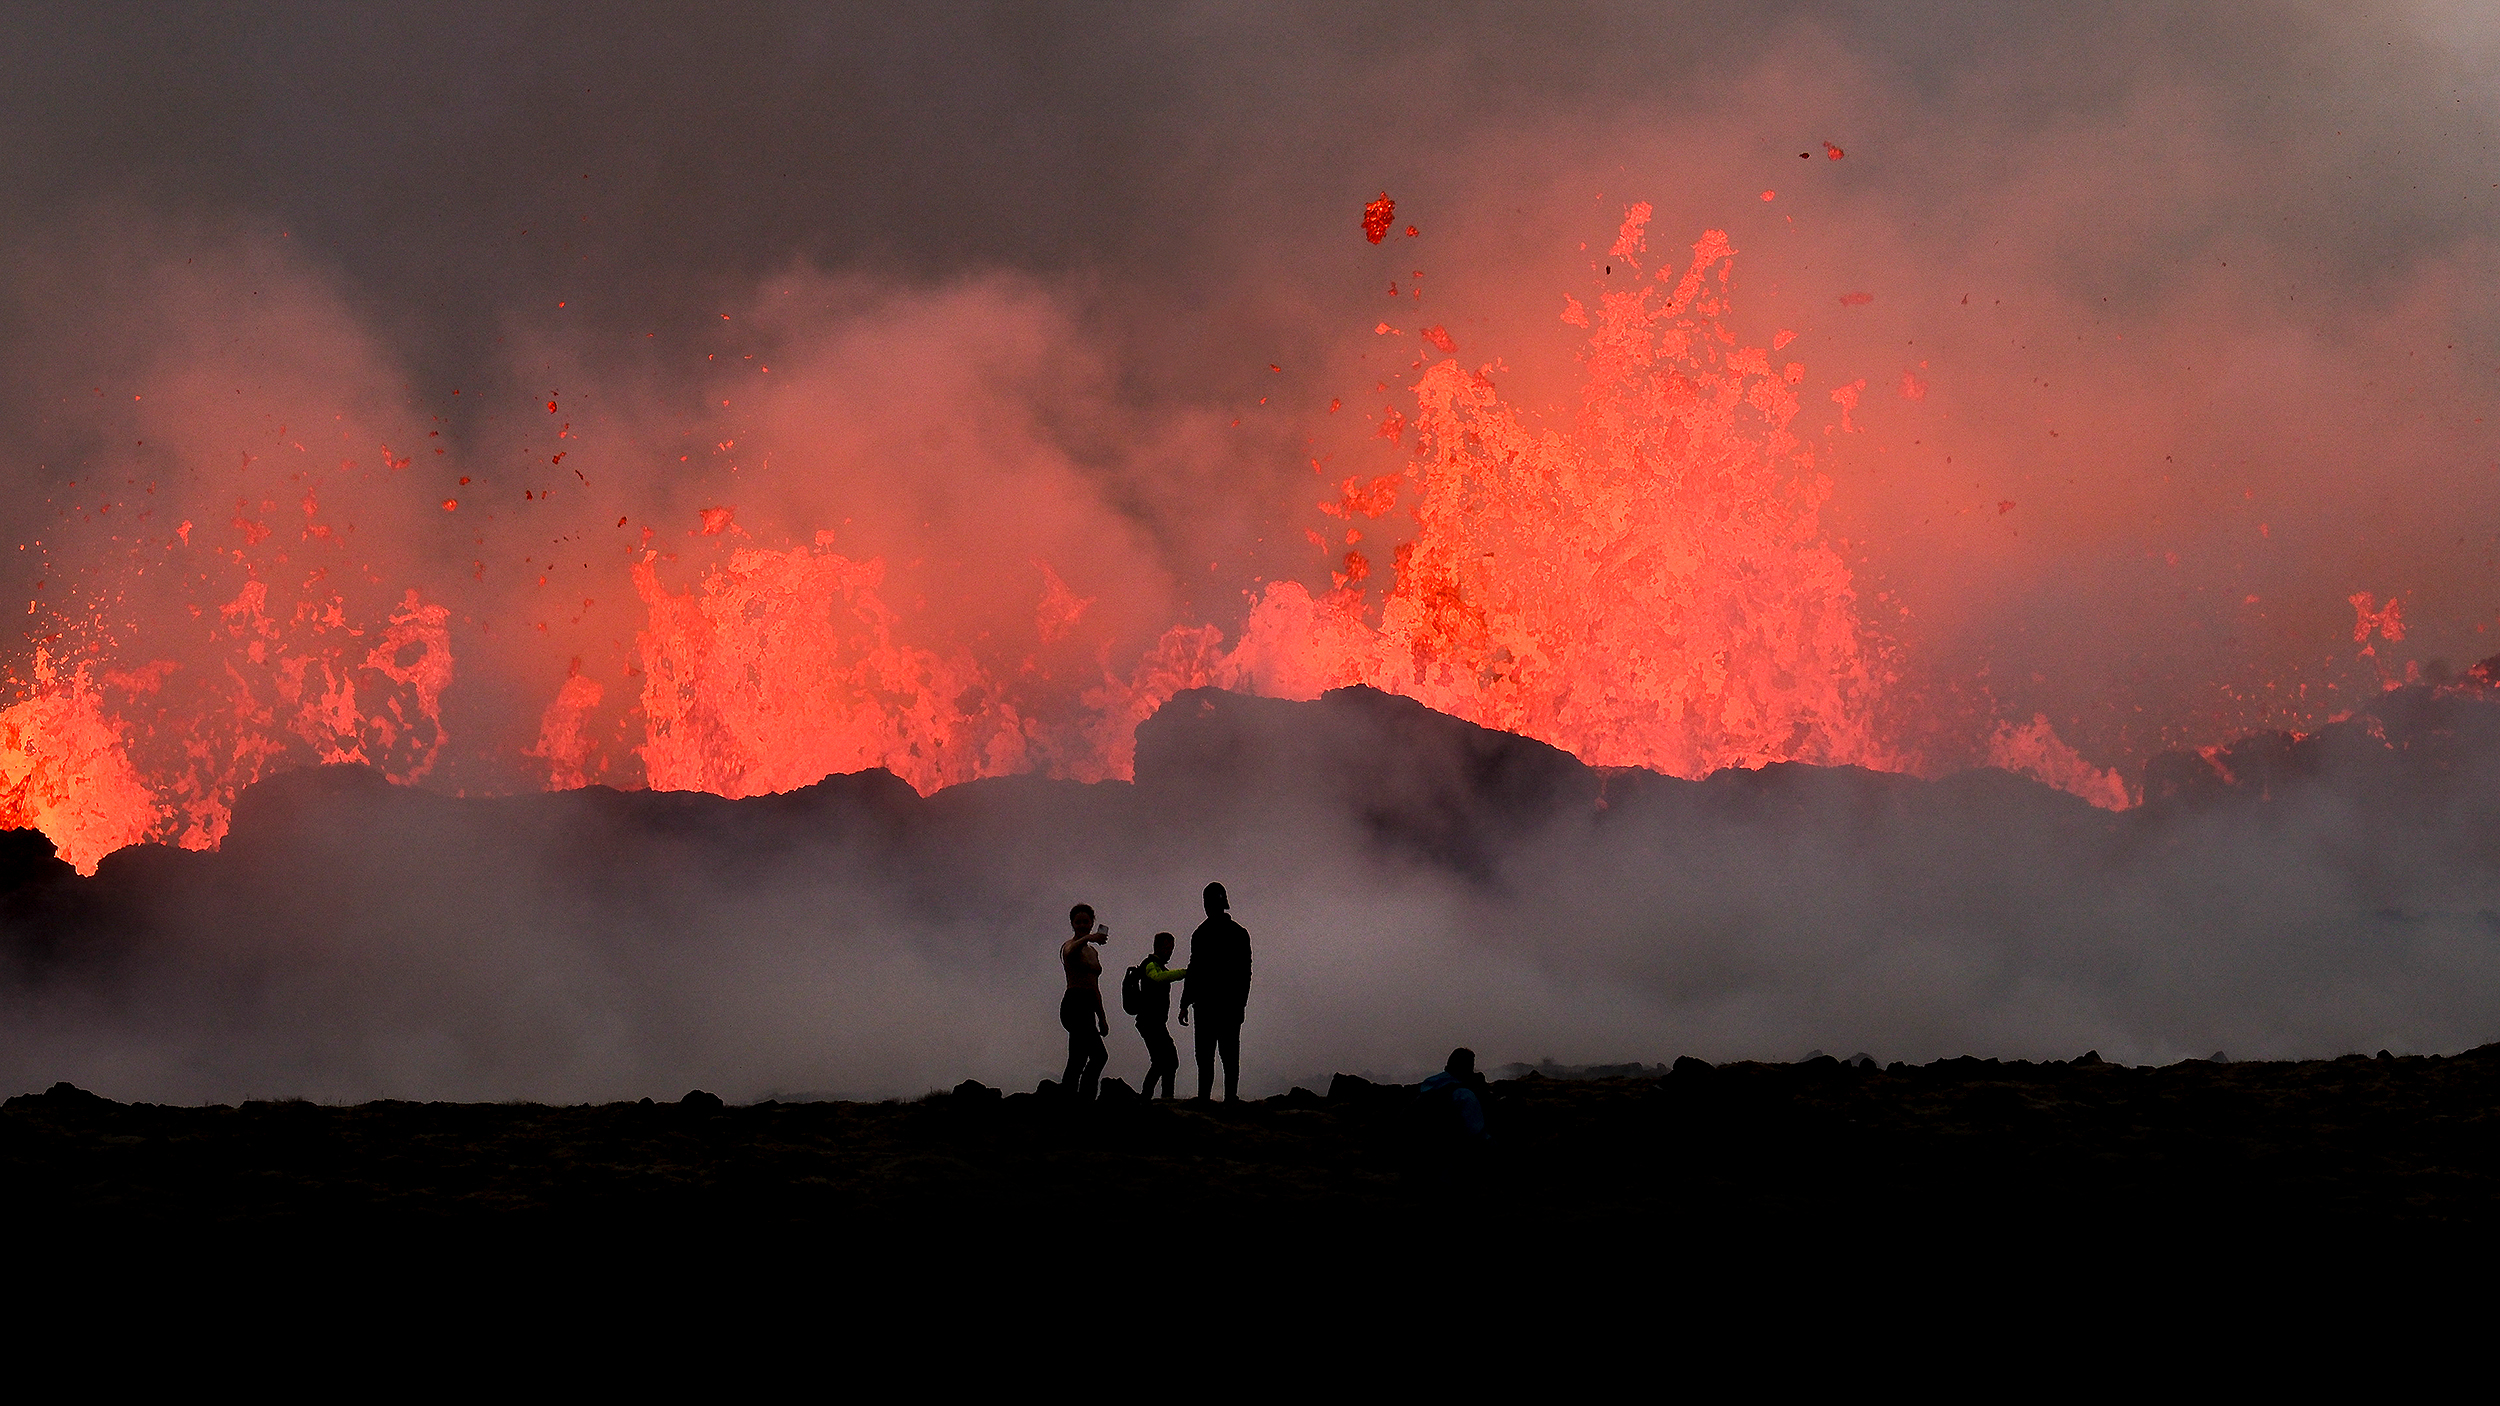 Spectators observing a dramatic eruption from active volcanoes at twilight.